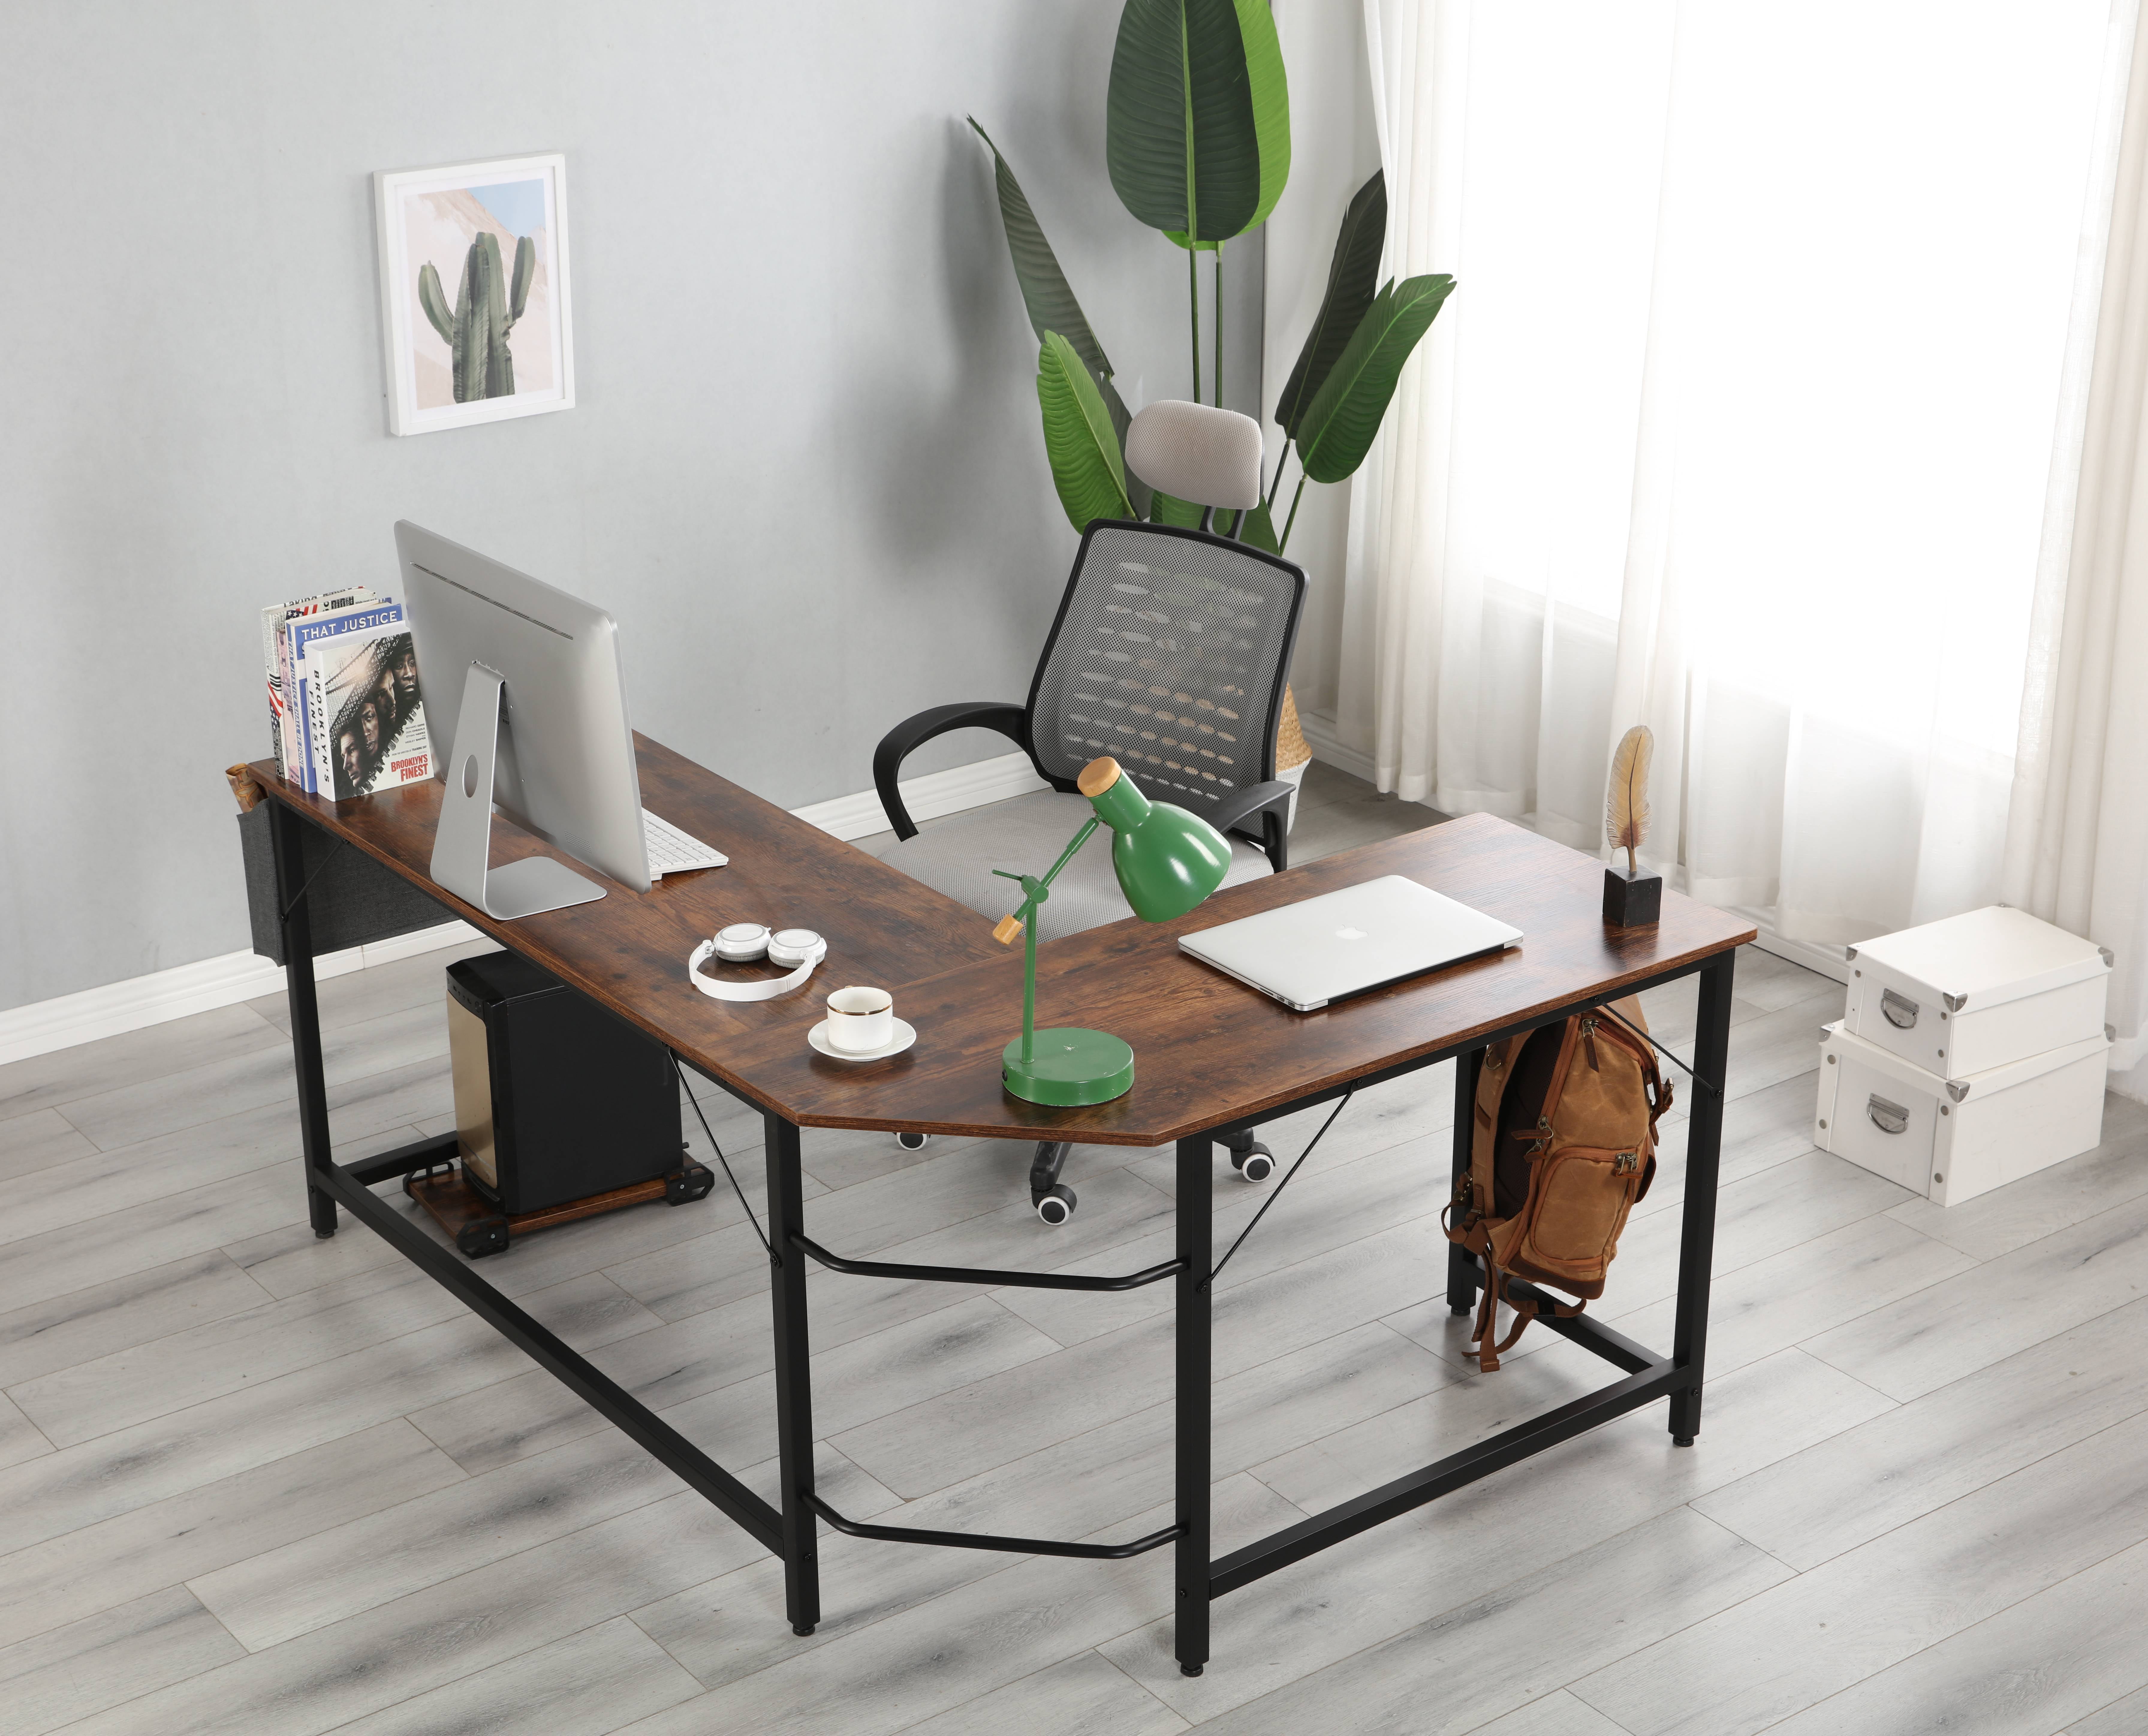 Espresso CAIYUN L Shaped Corner Desk 59 inches Computer Desk with Monitor Stand Home Office Desk with Storage Bag and Iron Hook